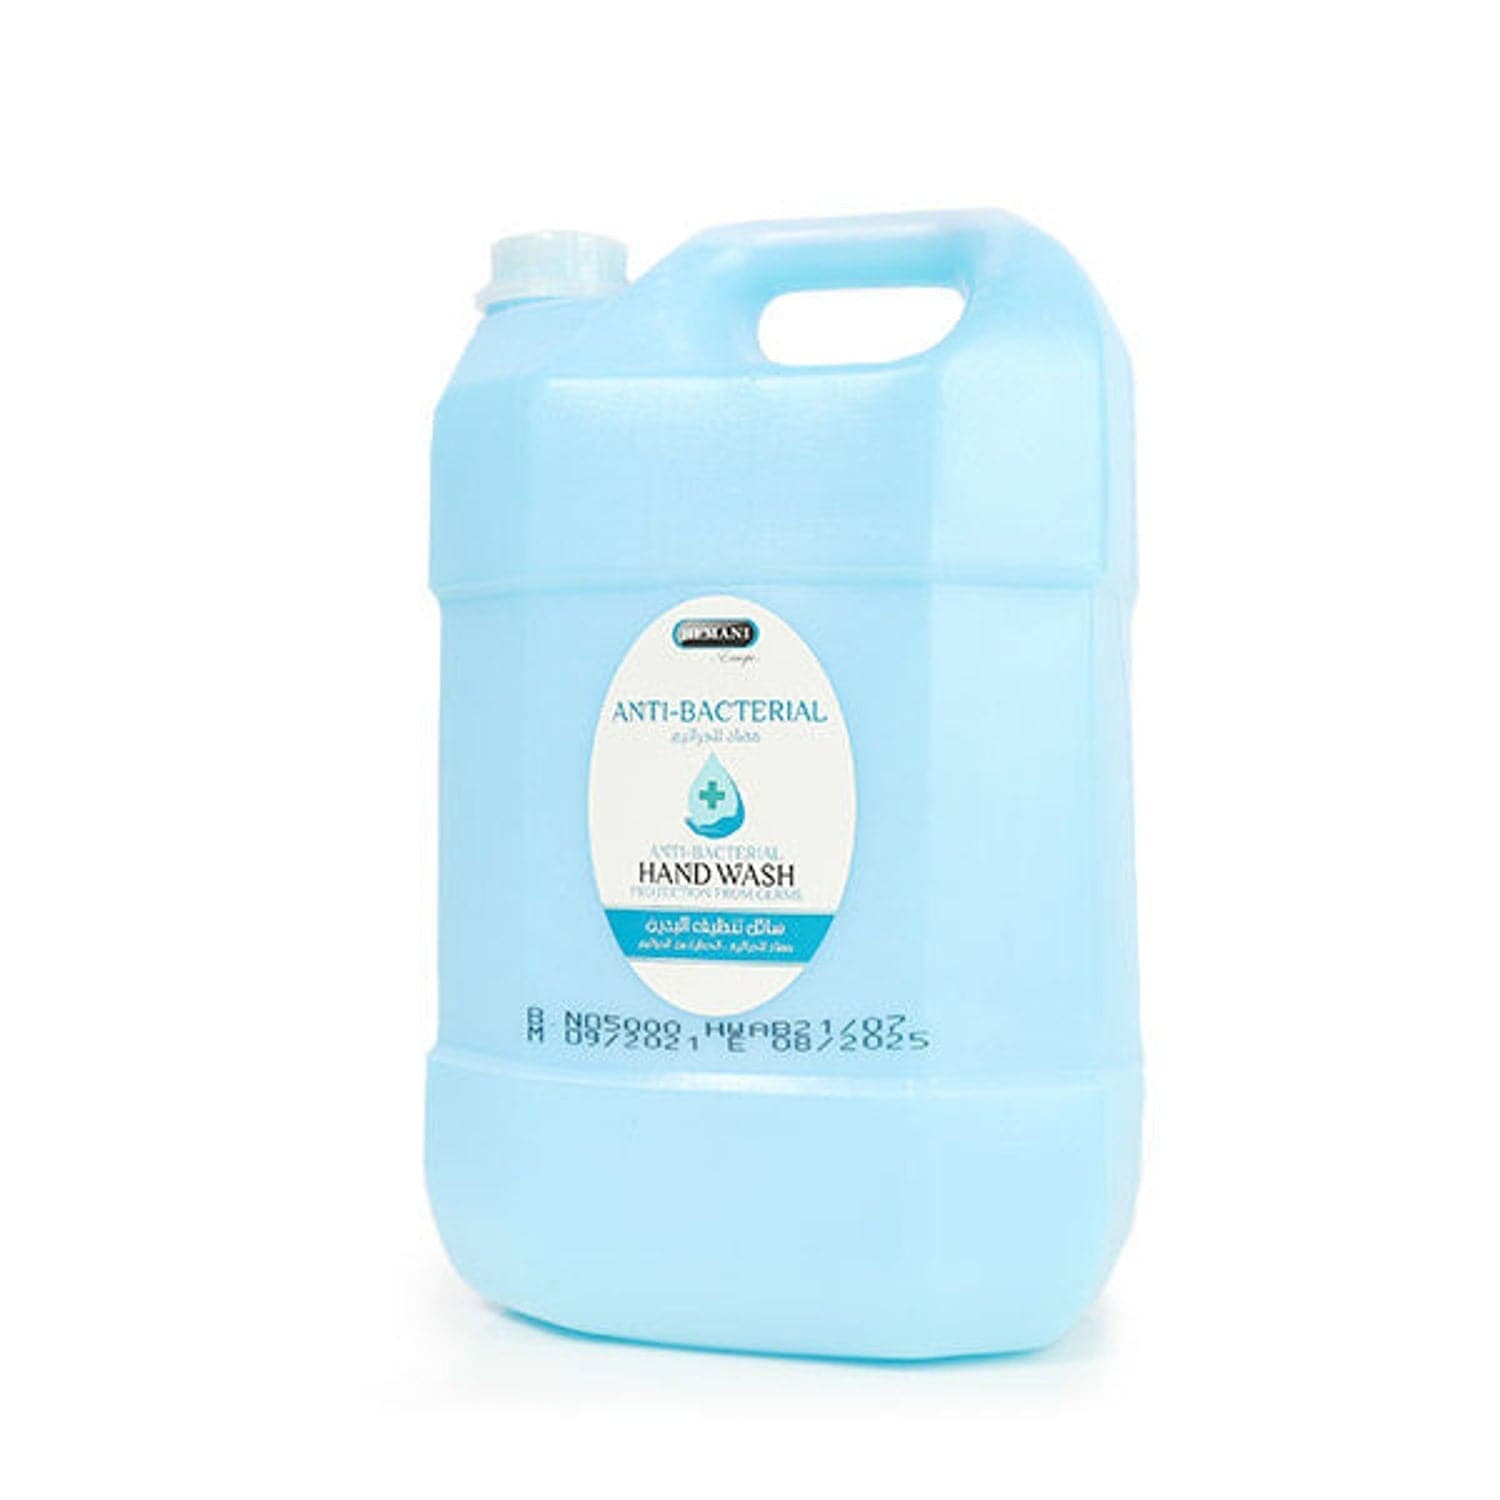 Hemani Anti-Bacterial Hand Wash 5Ltr - Premium  from Hemani - Just Rs 2225.00! Shop now at Cozmetica